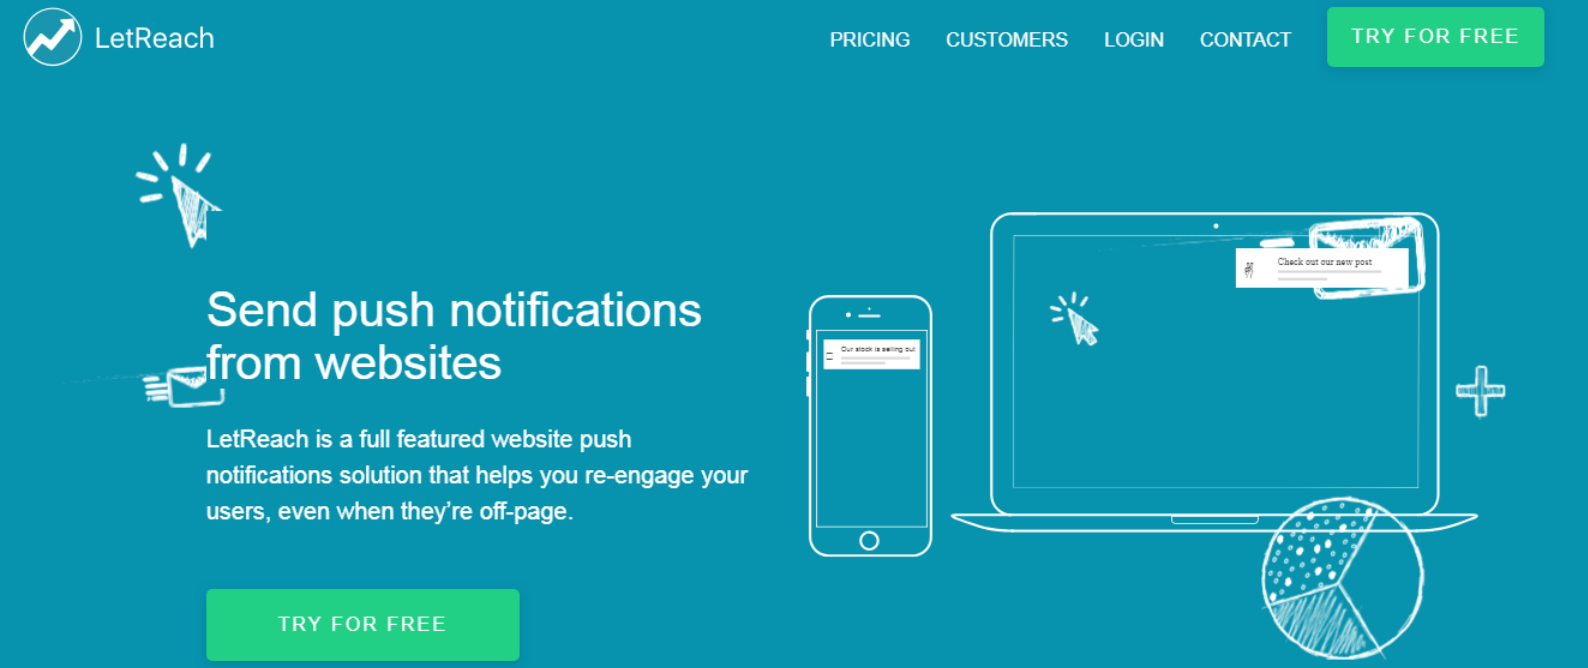 LetReach Review-Send push notification from websites